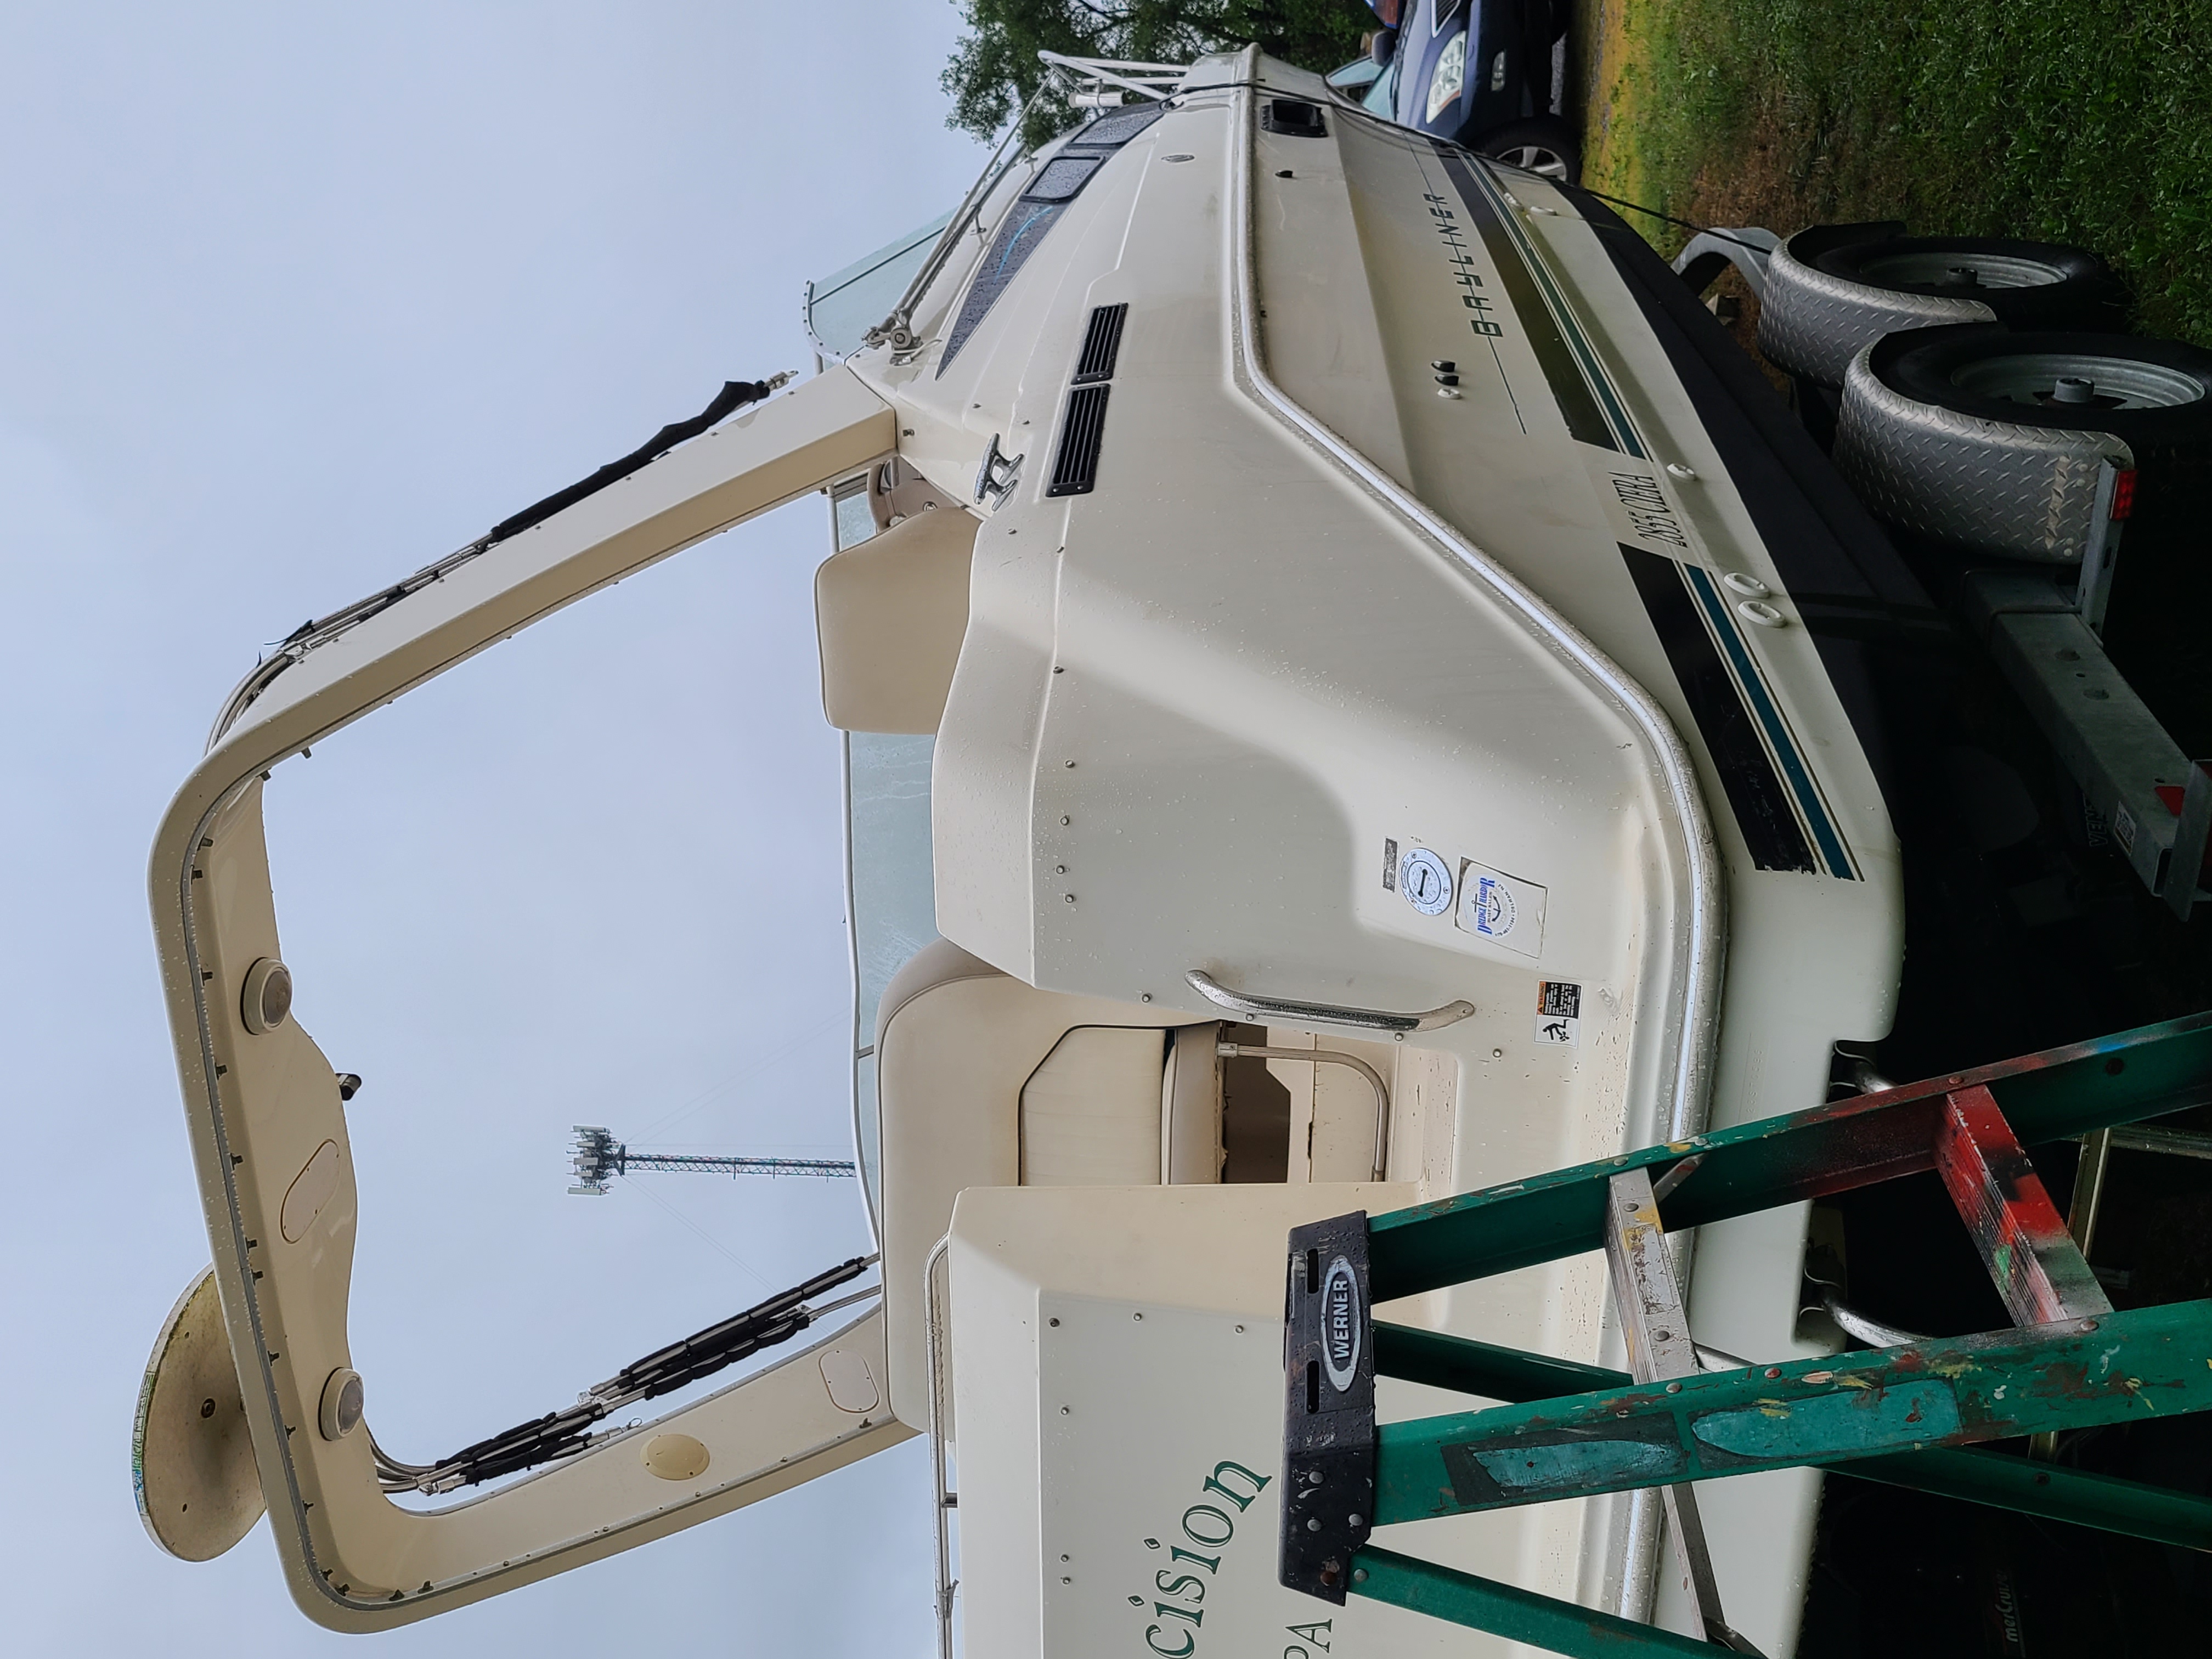 1995 Bayliner Ciera 2855 Power boat for sale in Hallam, PA - image 9 